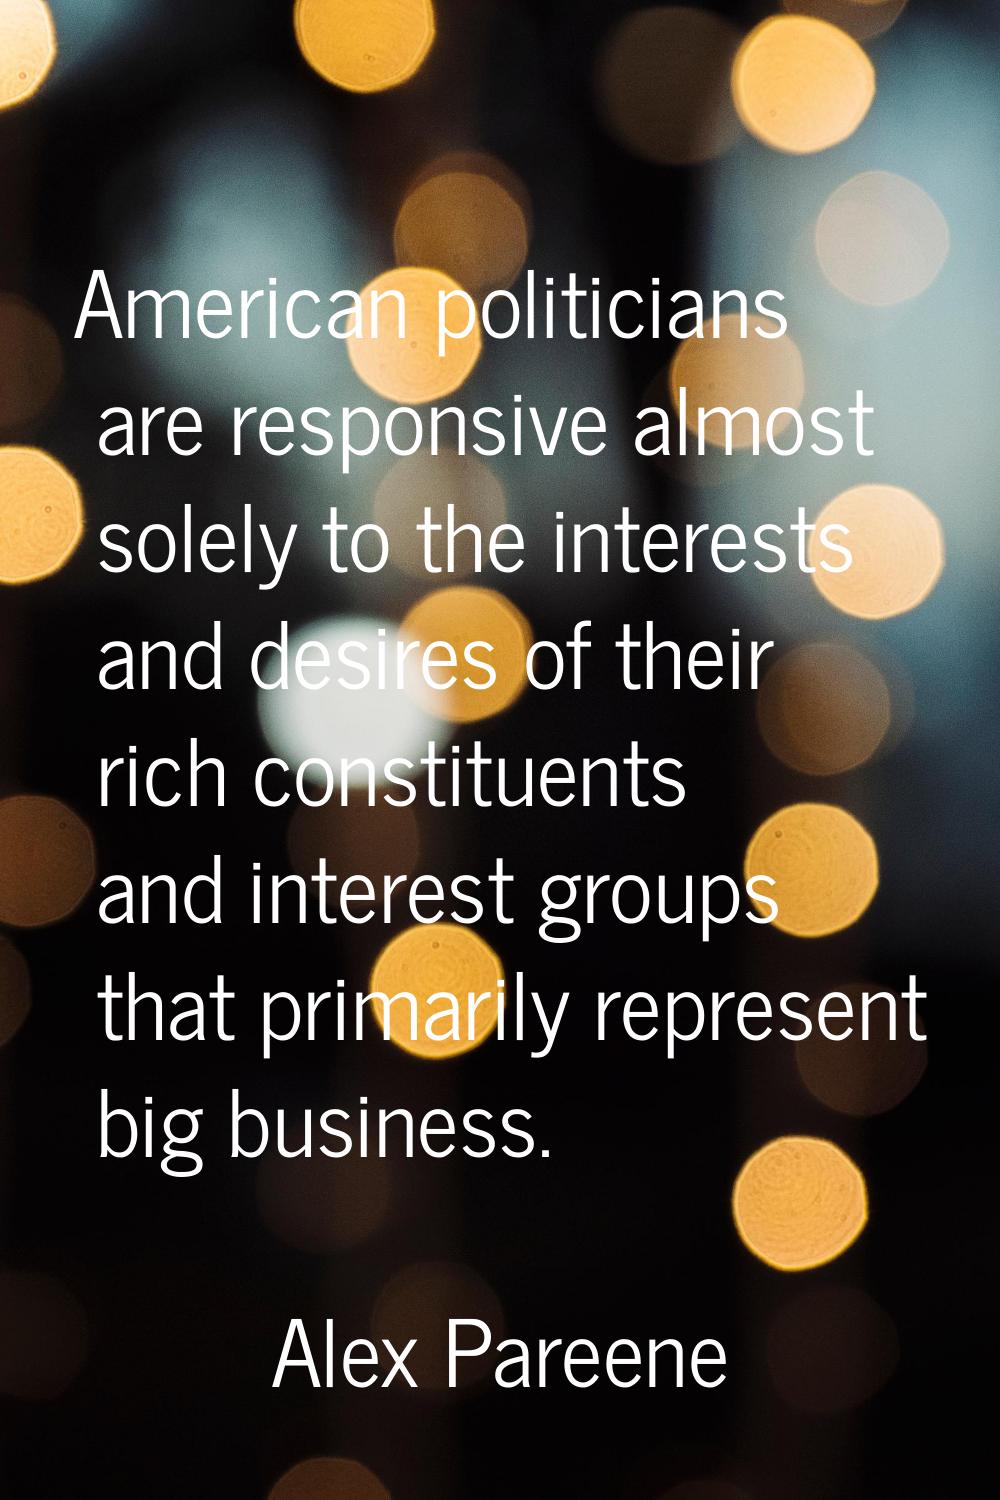 American politicians are responsive almost solely to the interests and desires of their rich consti